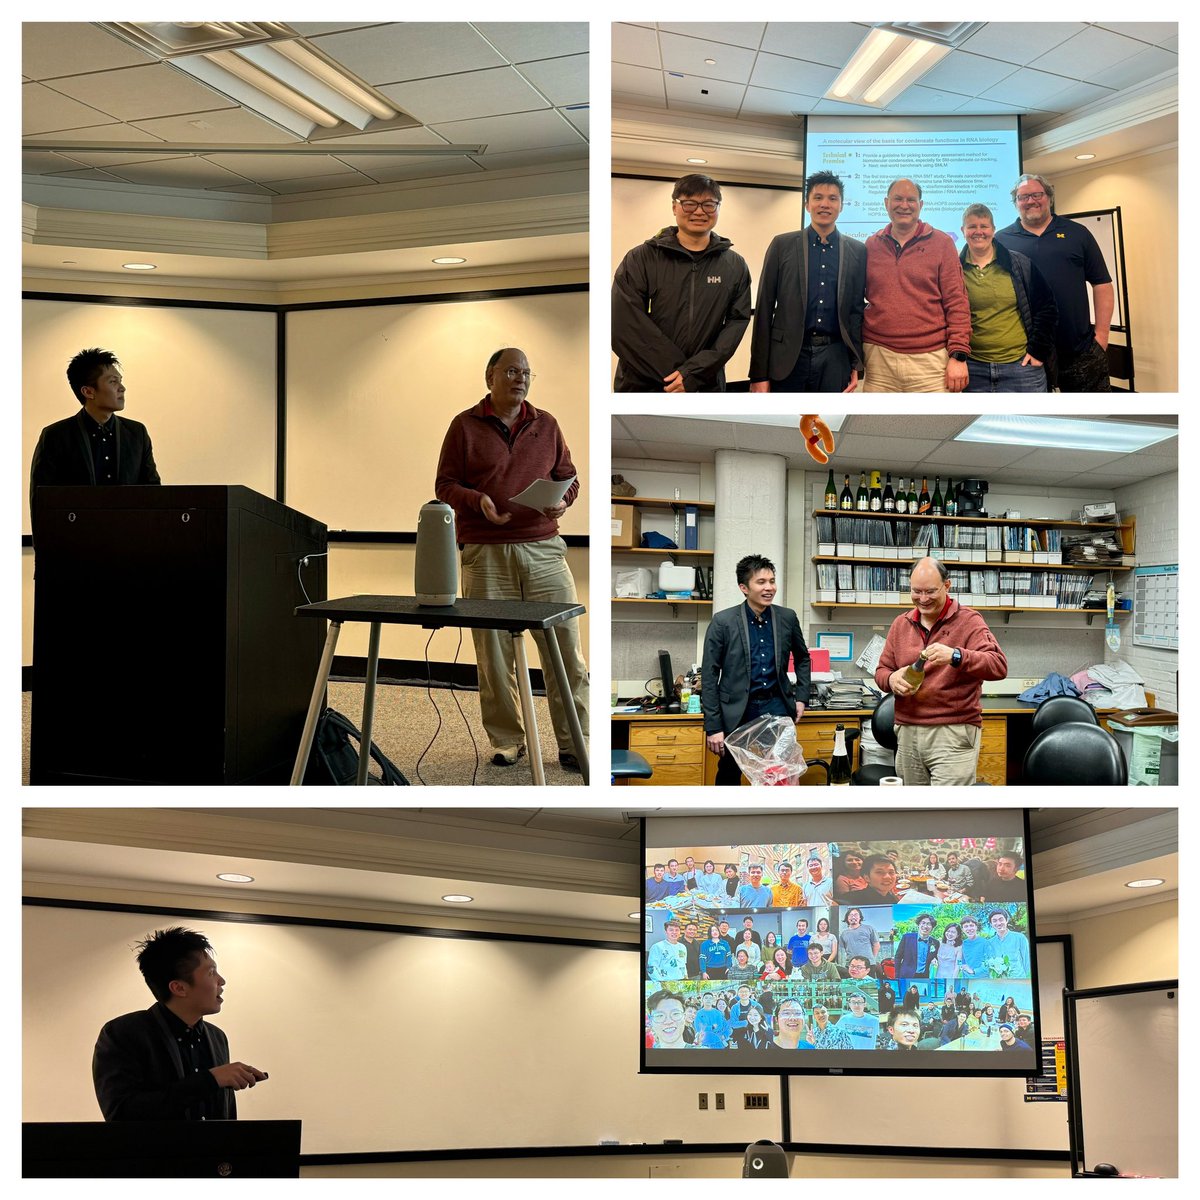 Great dissertation defense by @Guoming_Gao @UMBiophys - congrats Dr. Gao! Thanks committee members @sarahveatch, Puck Ohi & @KevinWoodUM for guidance along the way. Time to celebrate! @umichrna @UMich @MichiganChem